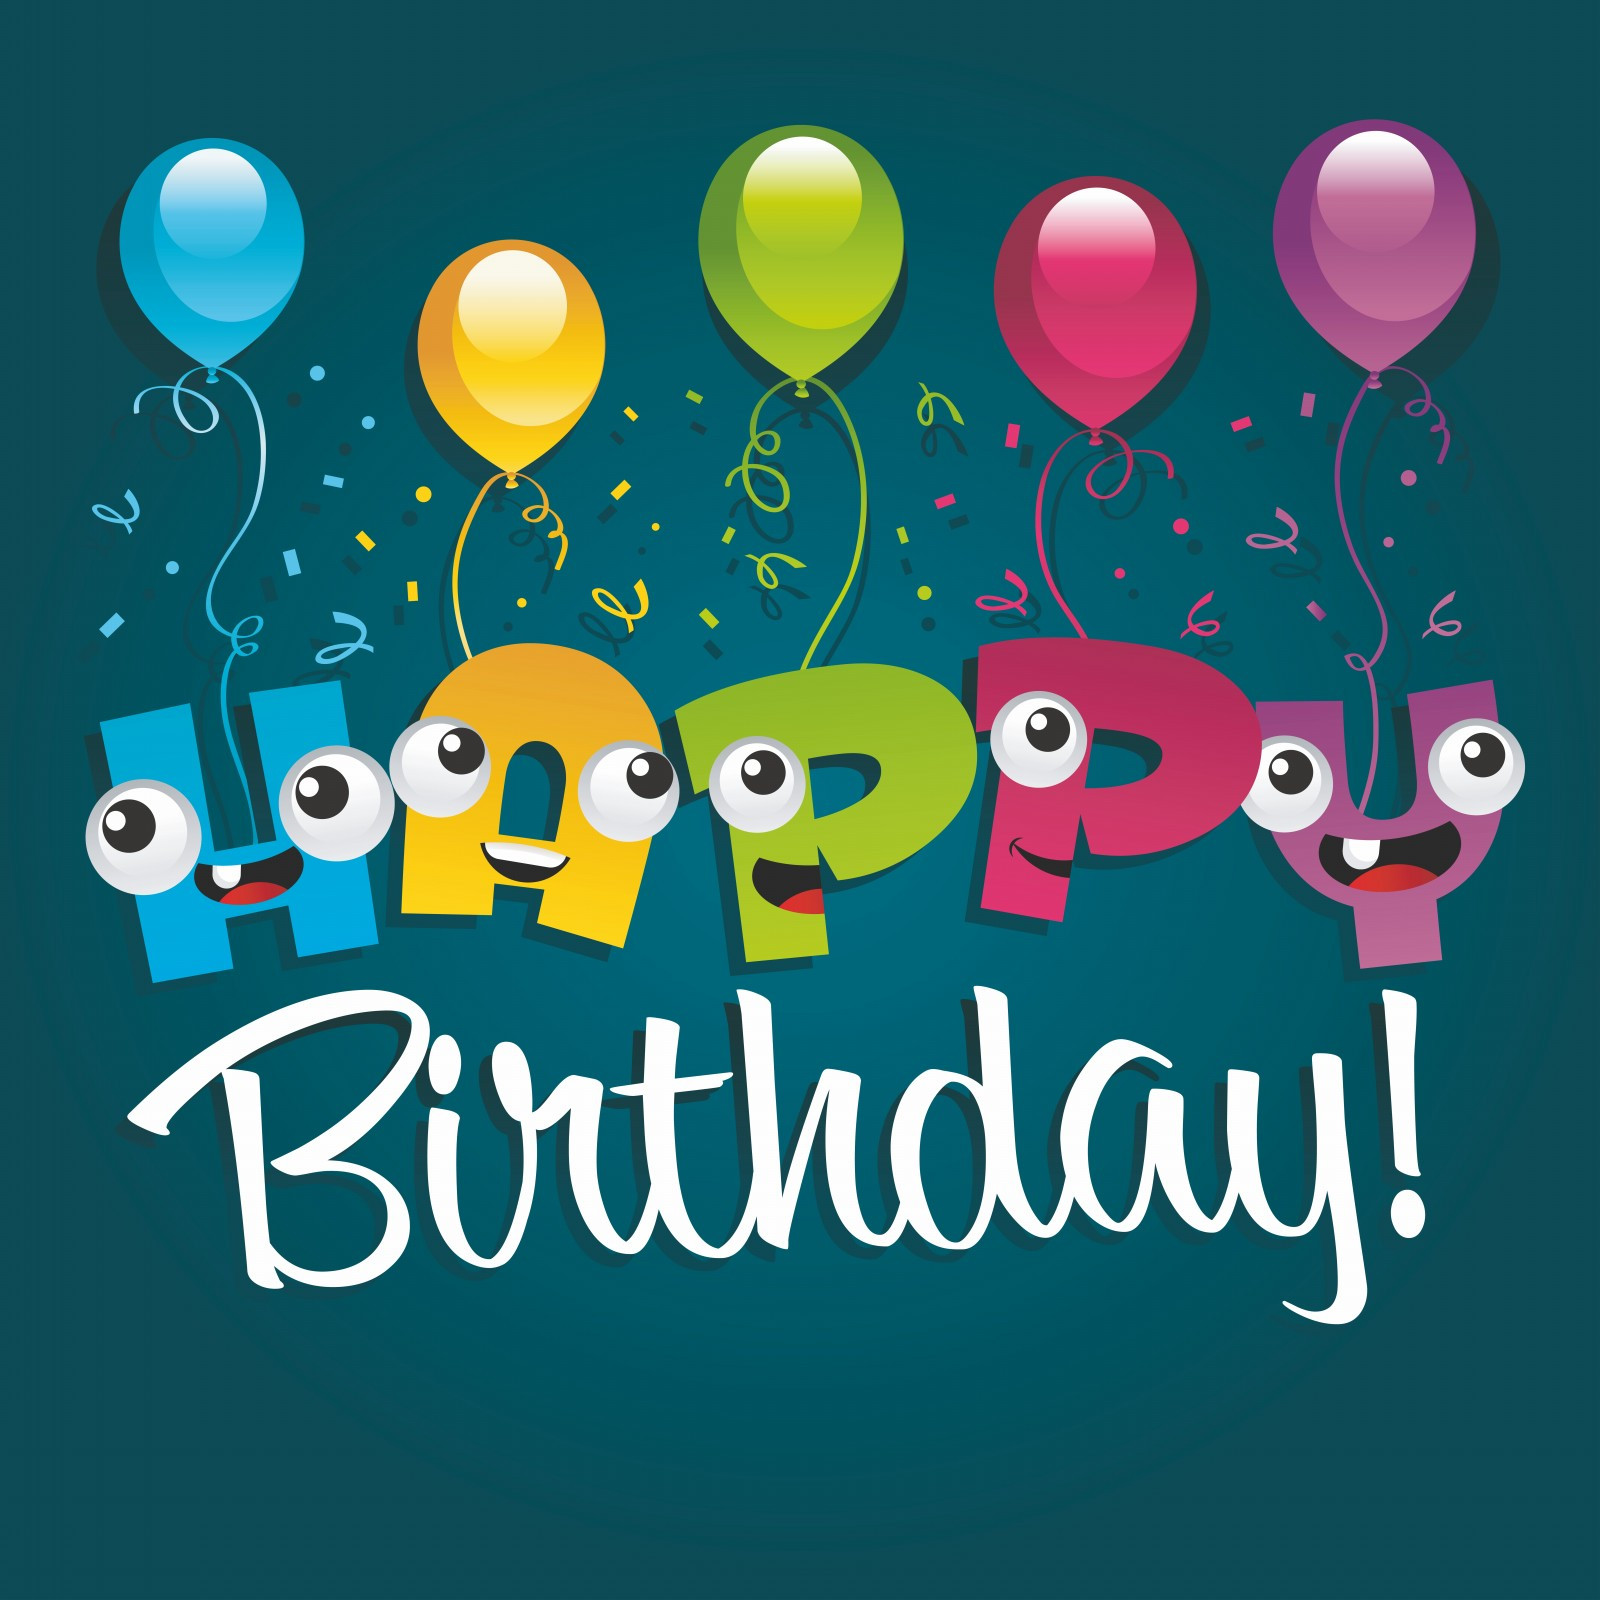 Design A Birthday Card
 35 Happy Birthday Cards Free To Download – The WoW Style